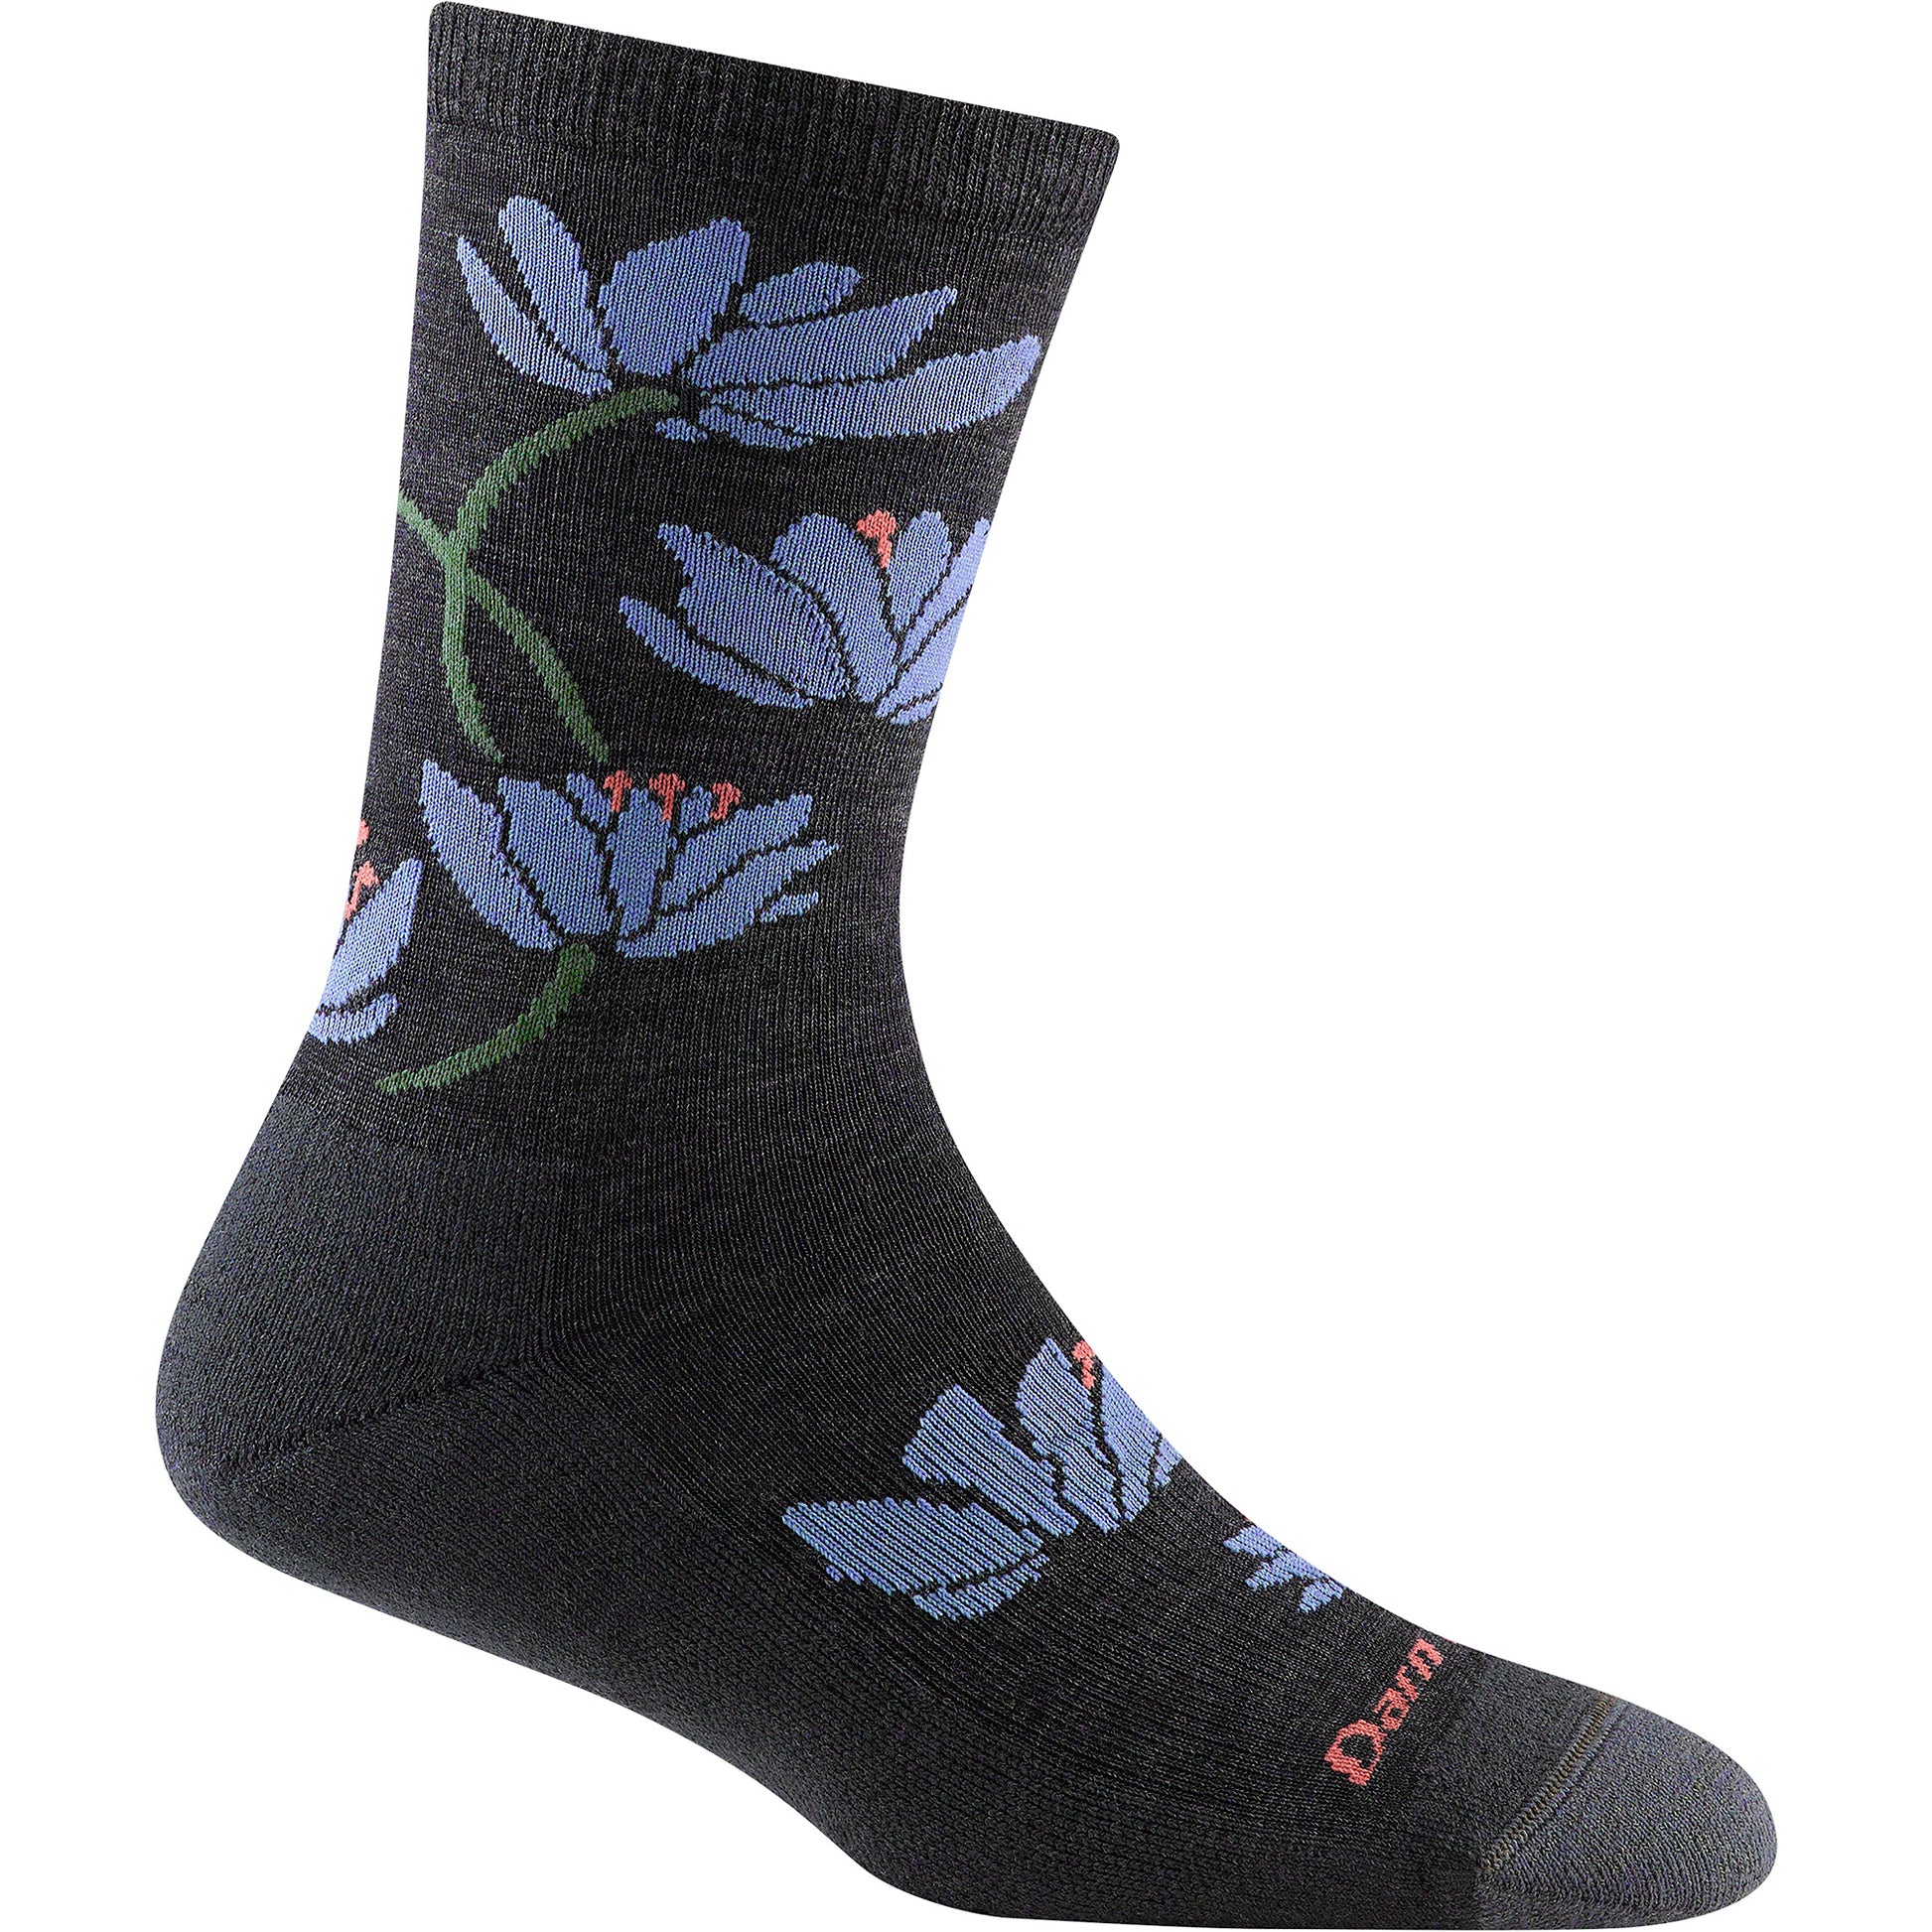 Women's Darn Tough Sock 6089 in Charcoal color